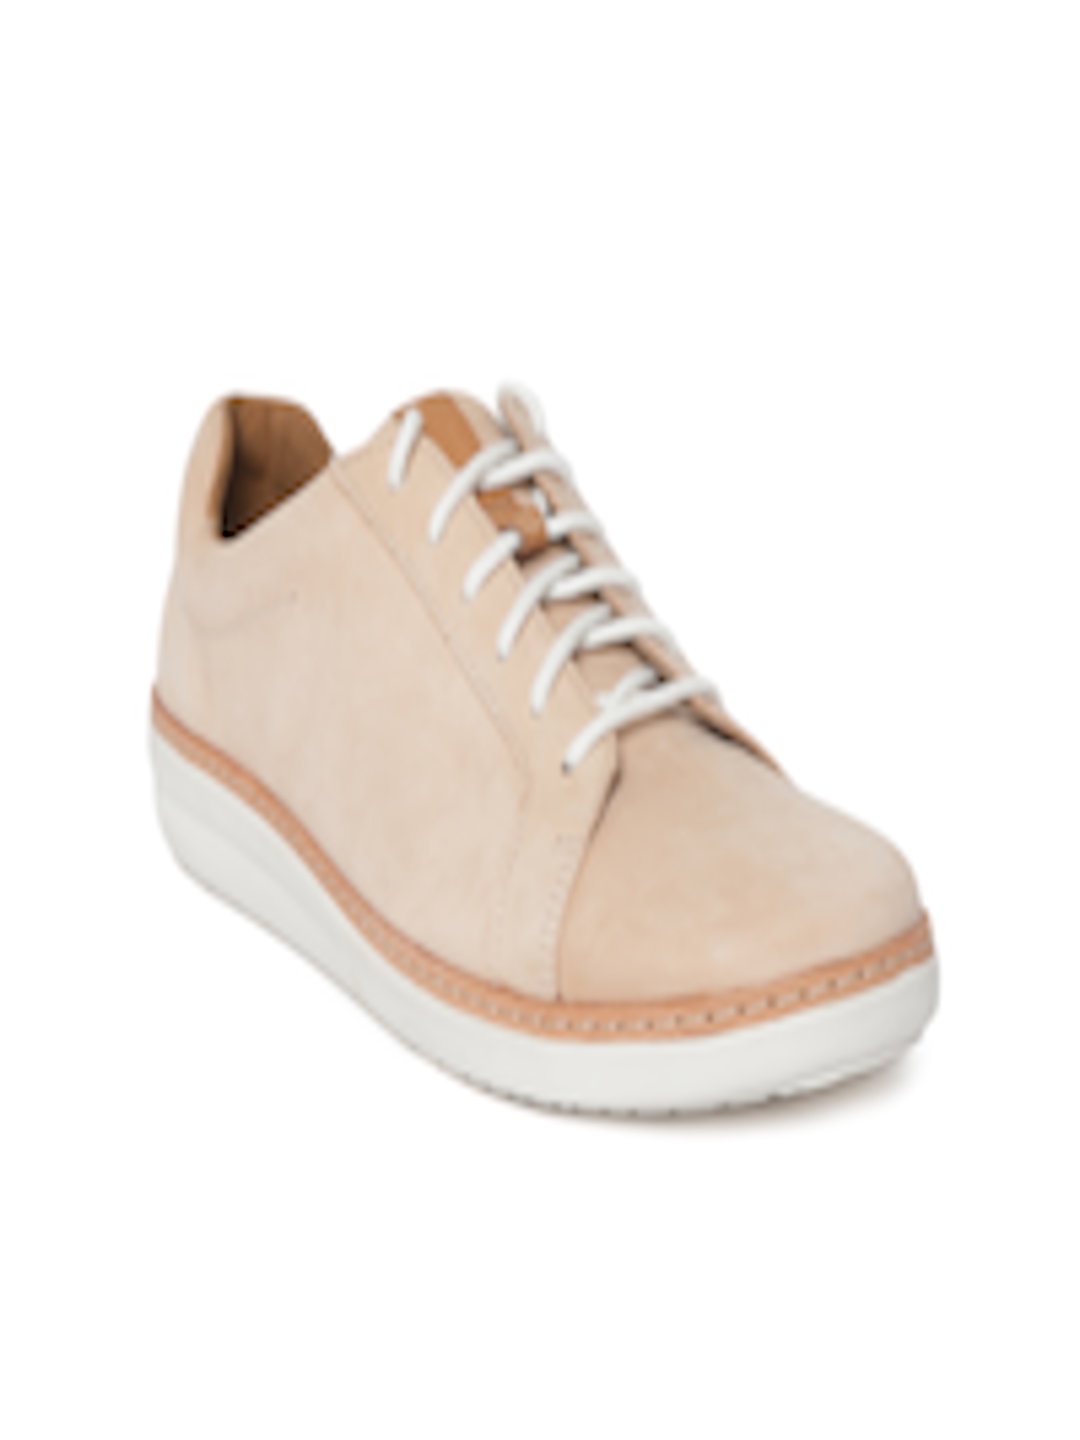 Buy Clarks Women Pink Leather Sneakers - Casual Shoes for Women 8361389 ...